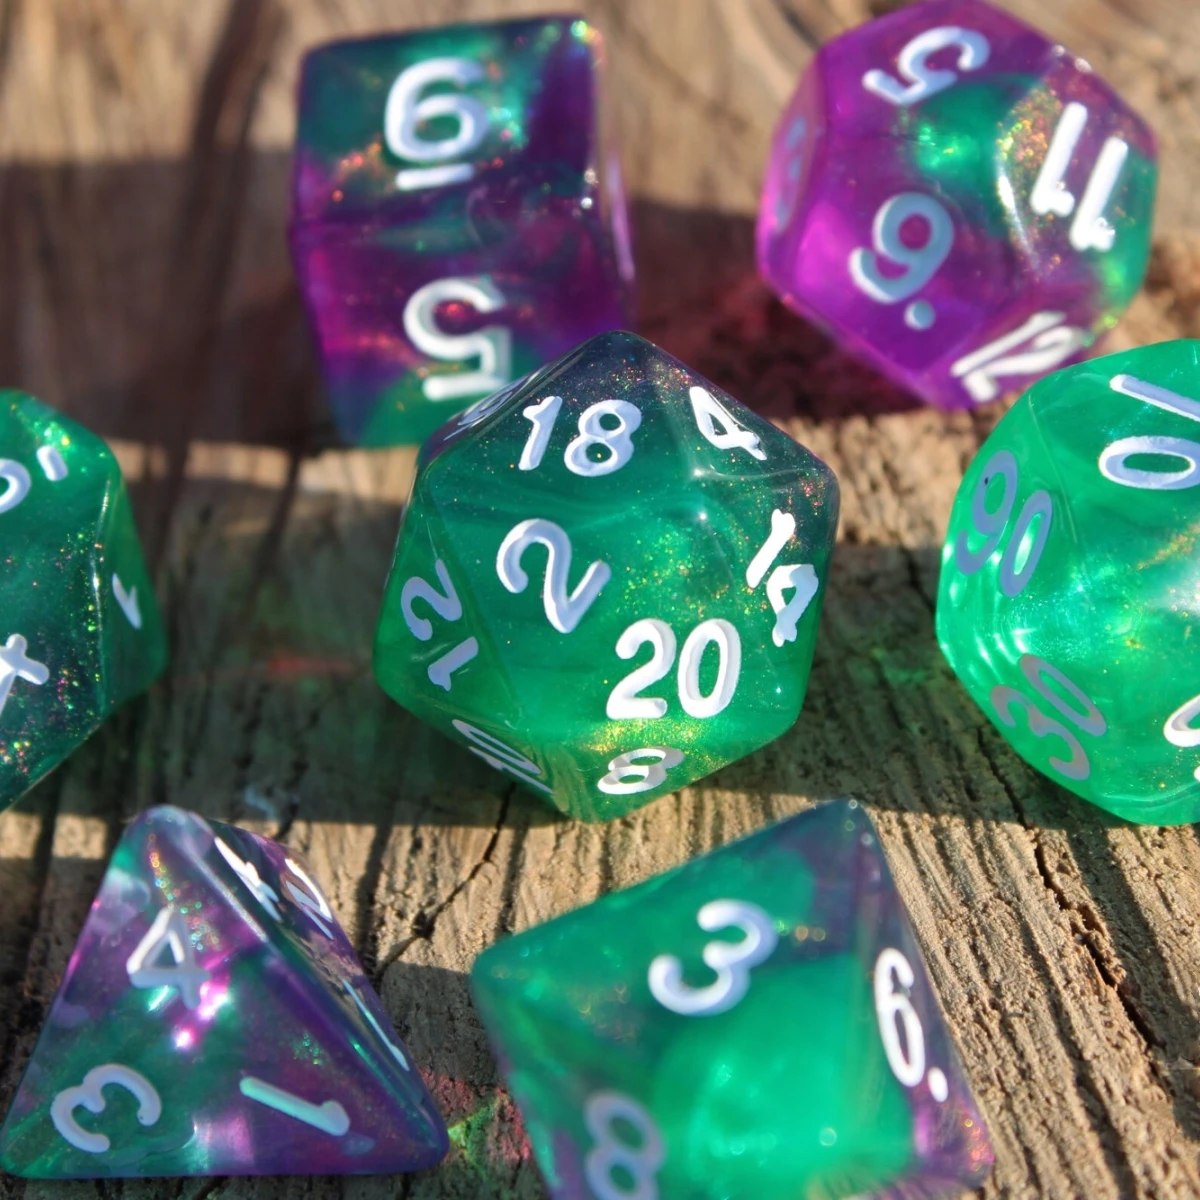 7Pcs/Set Green and Purple Starry Sky Dice for DND Dungeons and Dragons Table Games D&D RPG Tabletop Roleplaying